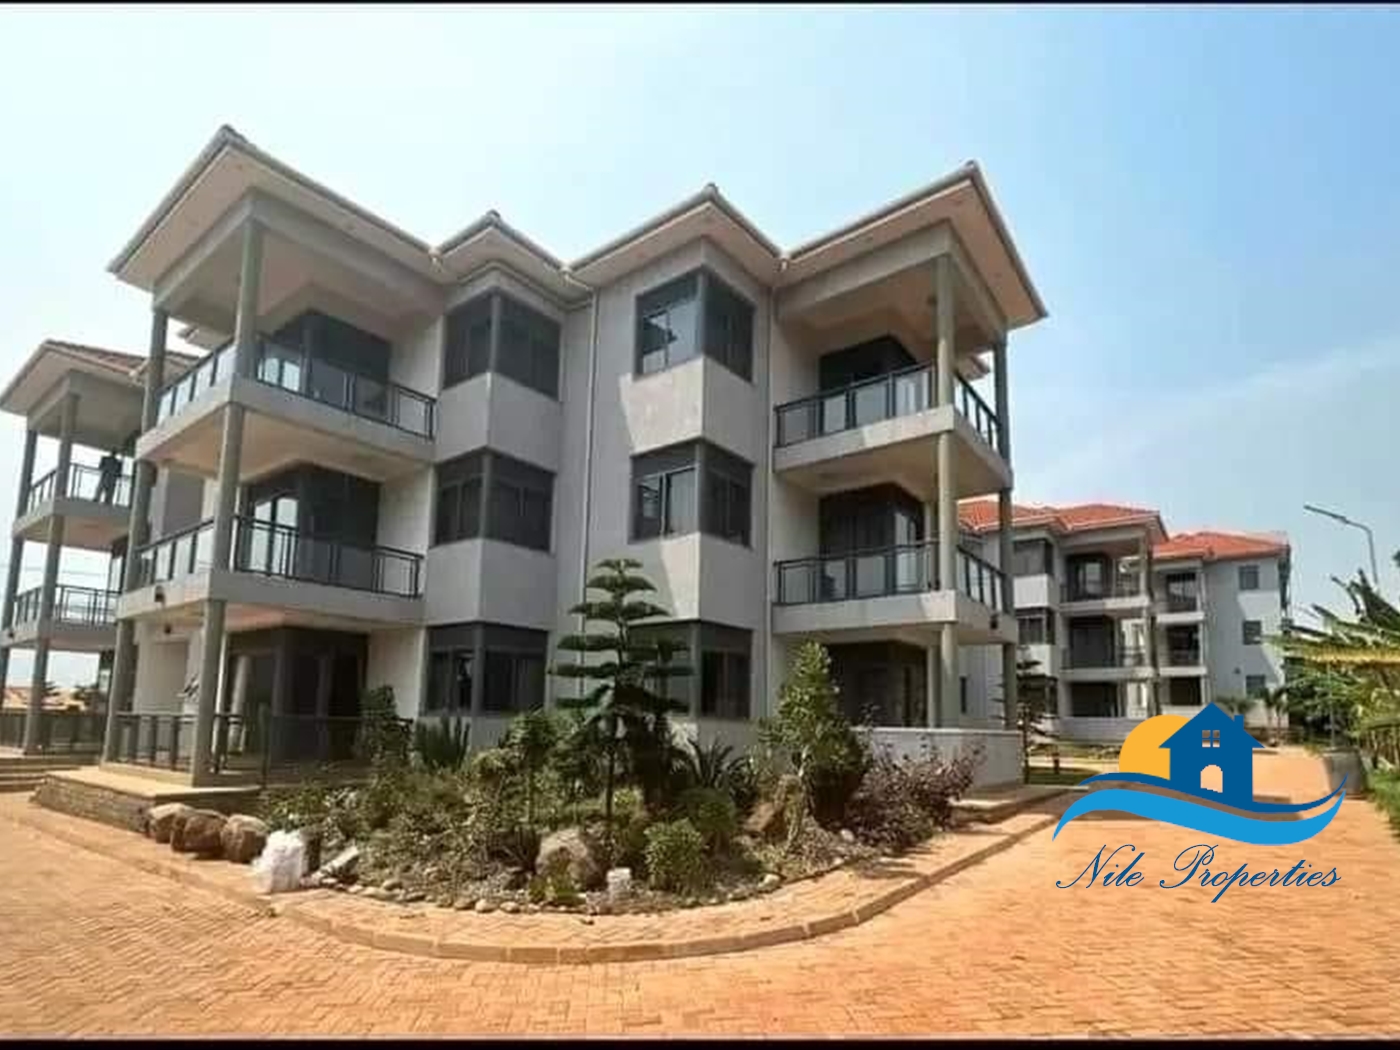 Apartment block for rent in Masese Jinja